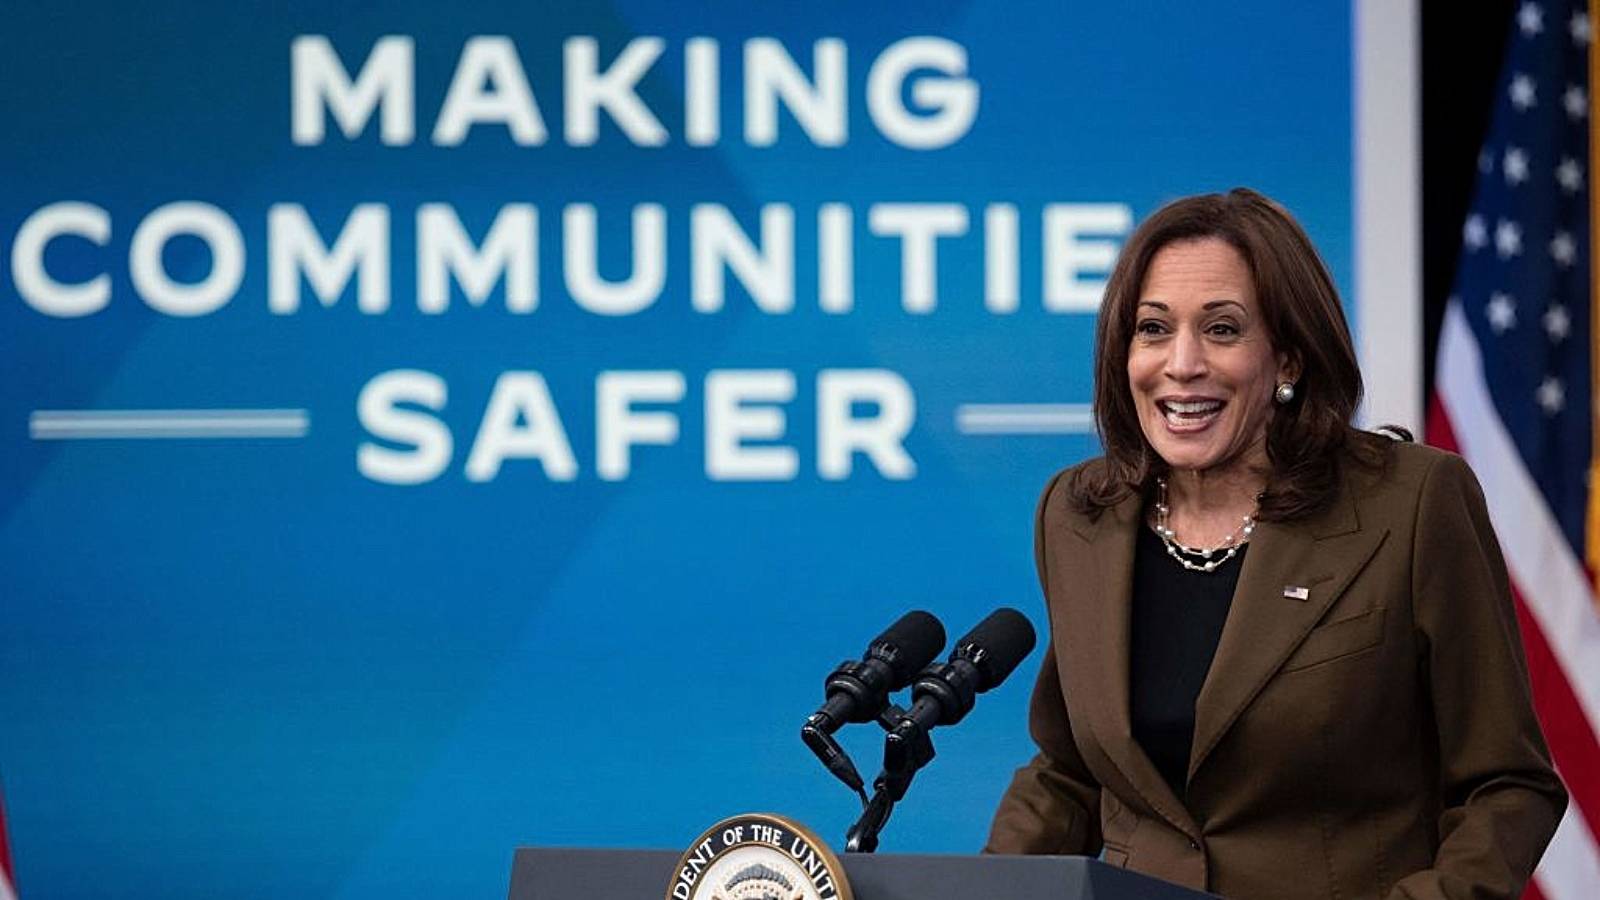 US Vice President Kamala Harris provides an update on the Biden-Harris Administrations actions to improve public safety in all communities during an event in the South Court Auditorium of the Eisenhower Executive Office Building, next to the White House, in Washington, DC, on March 16, 2022.
